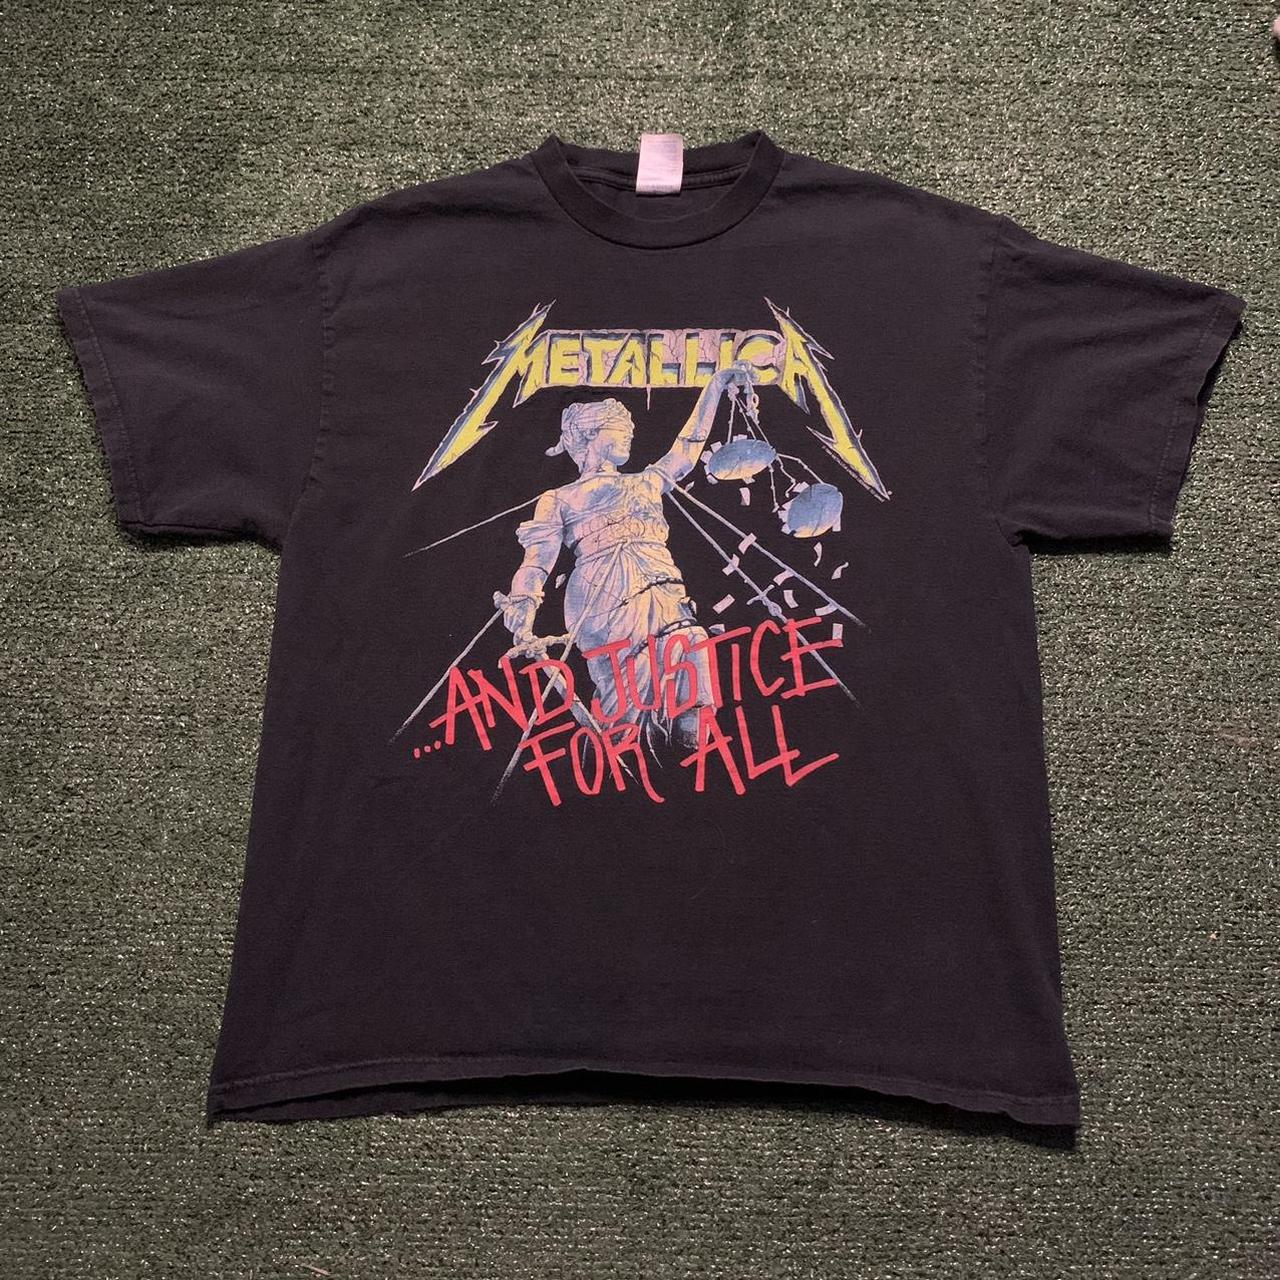 Vintage Metallica ‘And Justice For All’ 2000s... - Depop